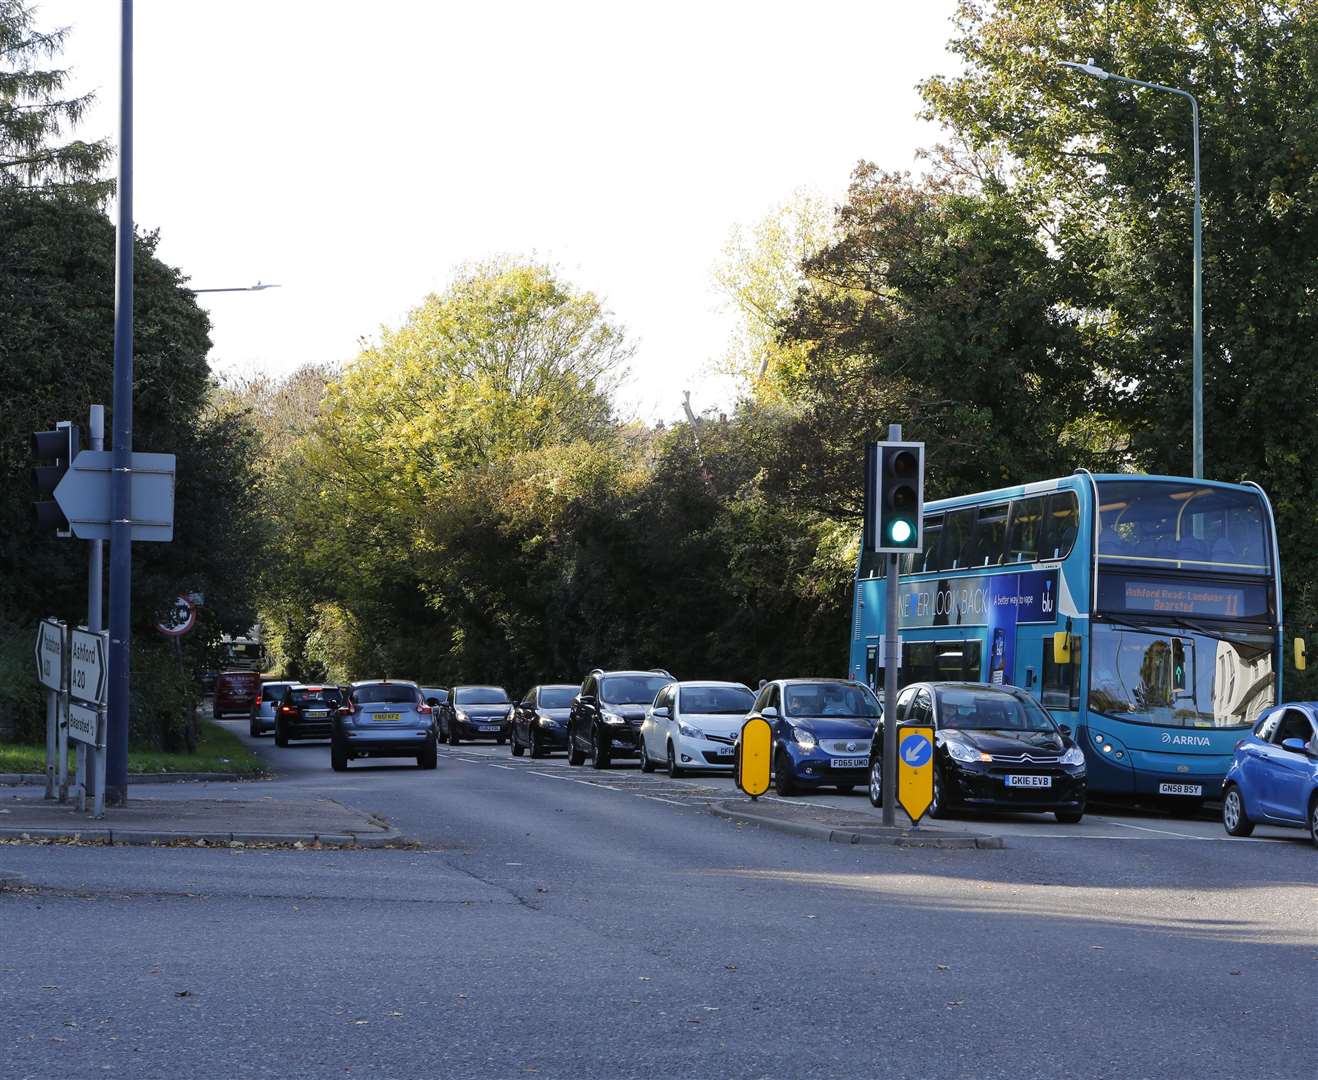 Around 50% of respondents disagree with plans for the A20 Ashford Road junction with Willington Street